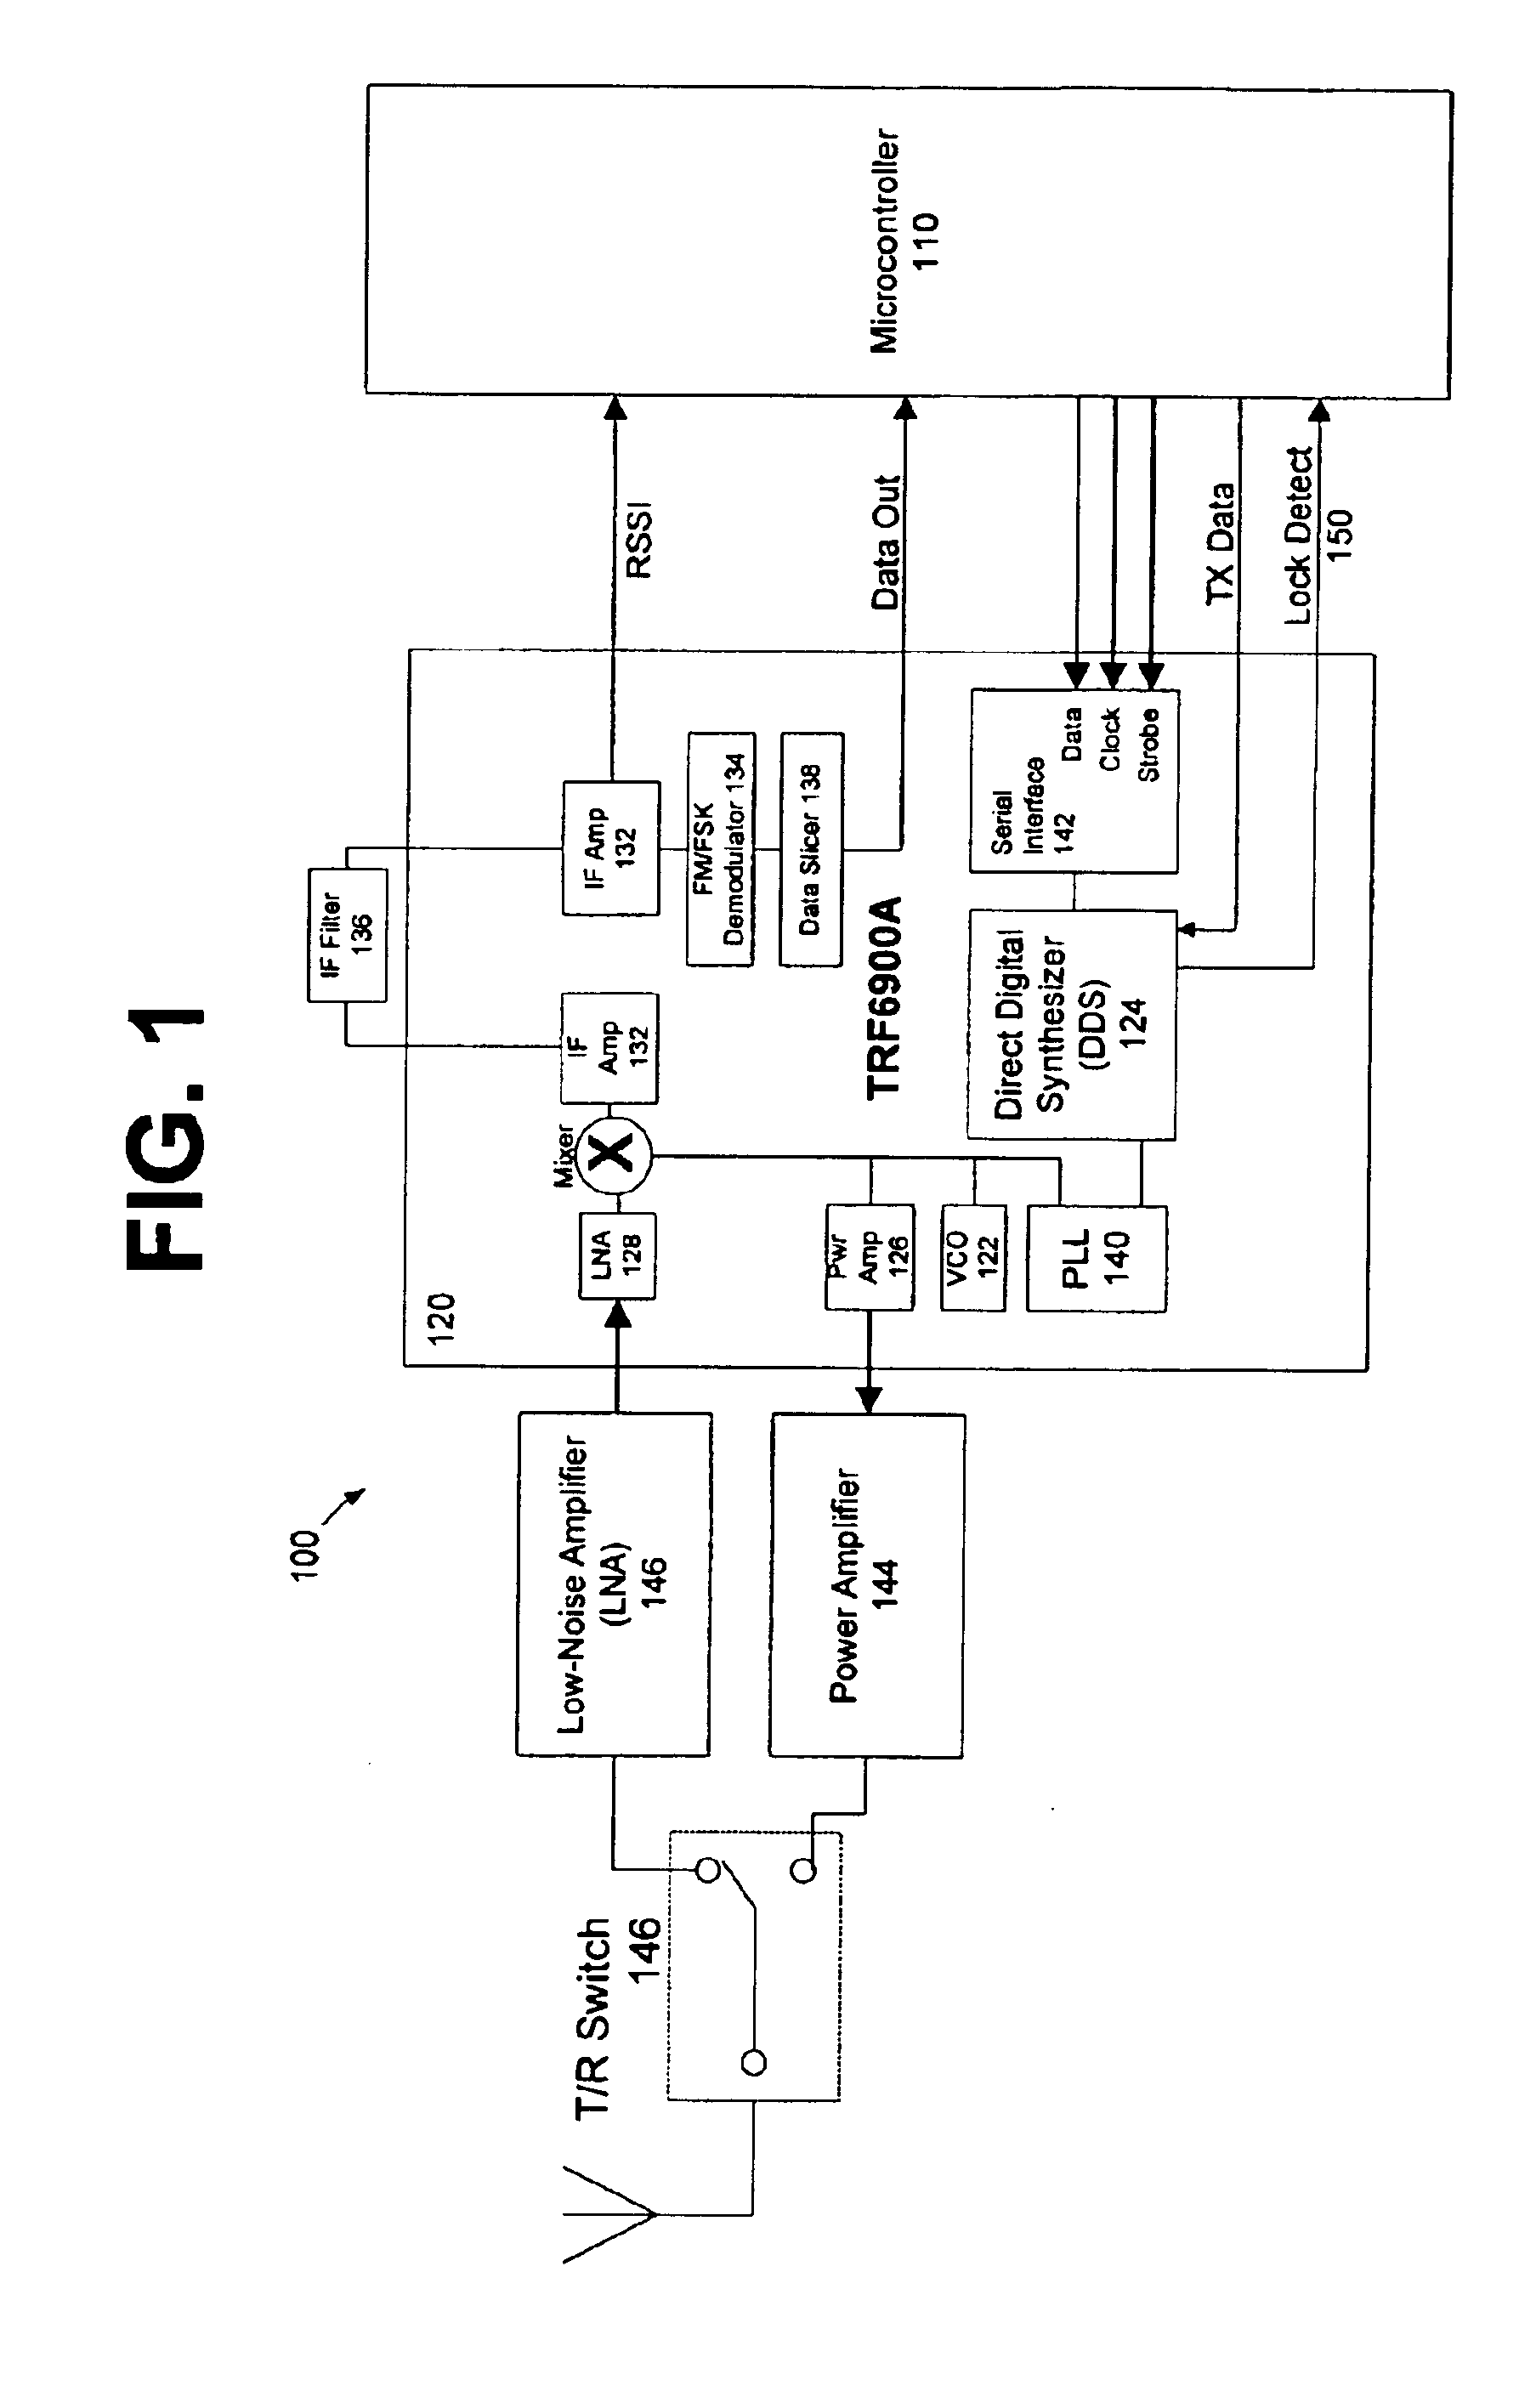 Frequency hopping spread spectrum communications system